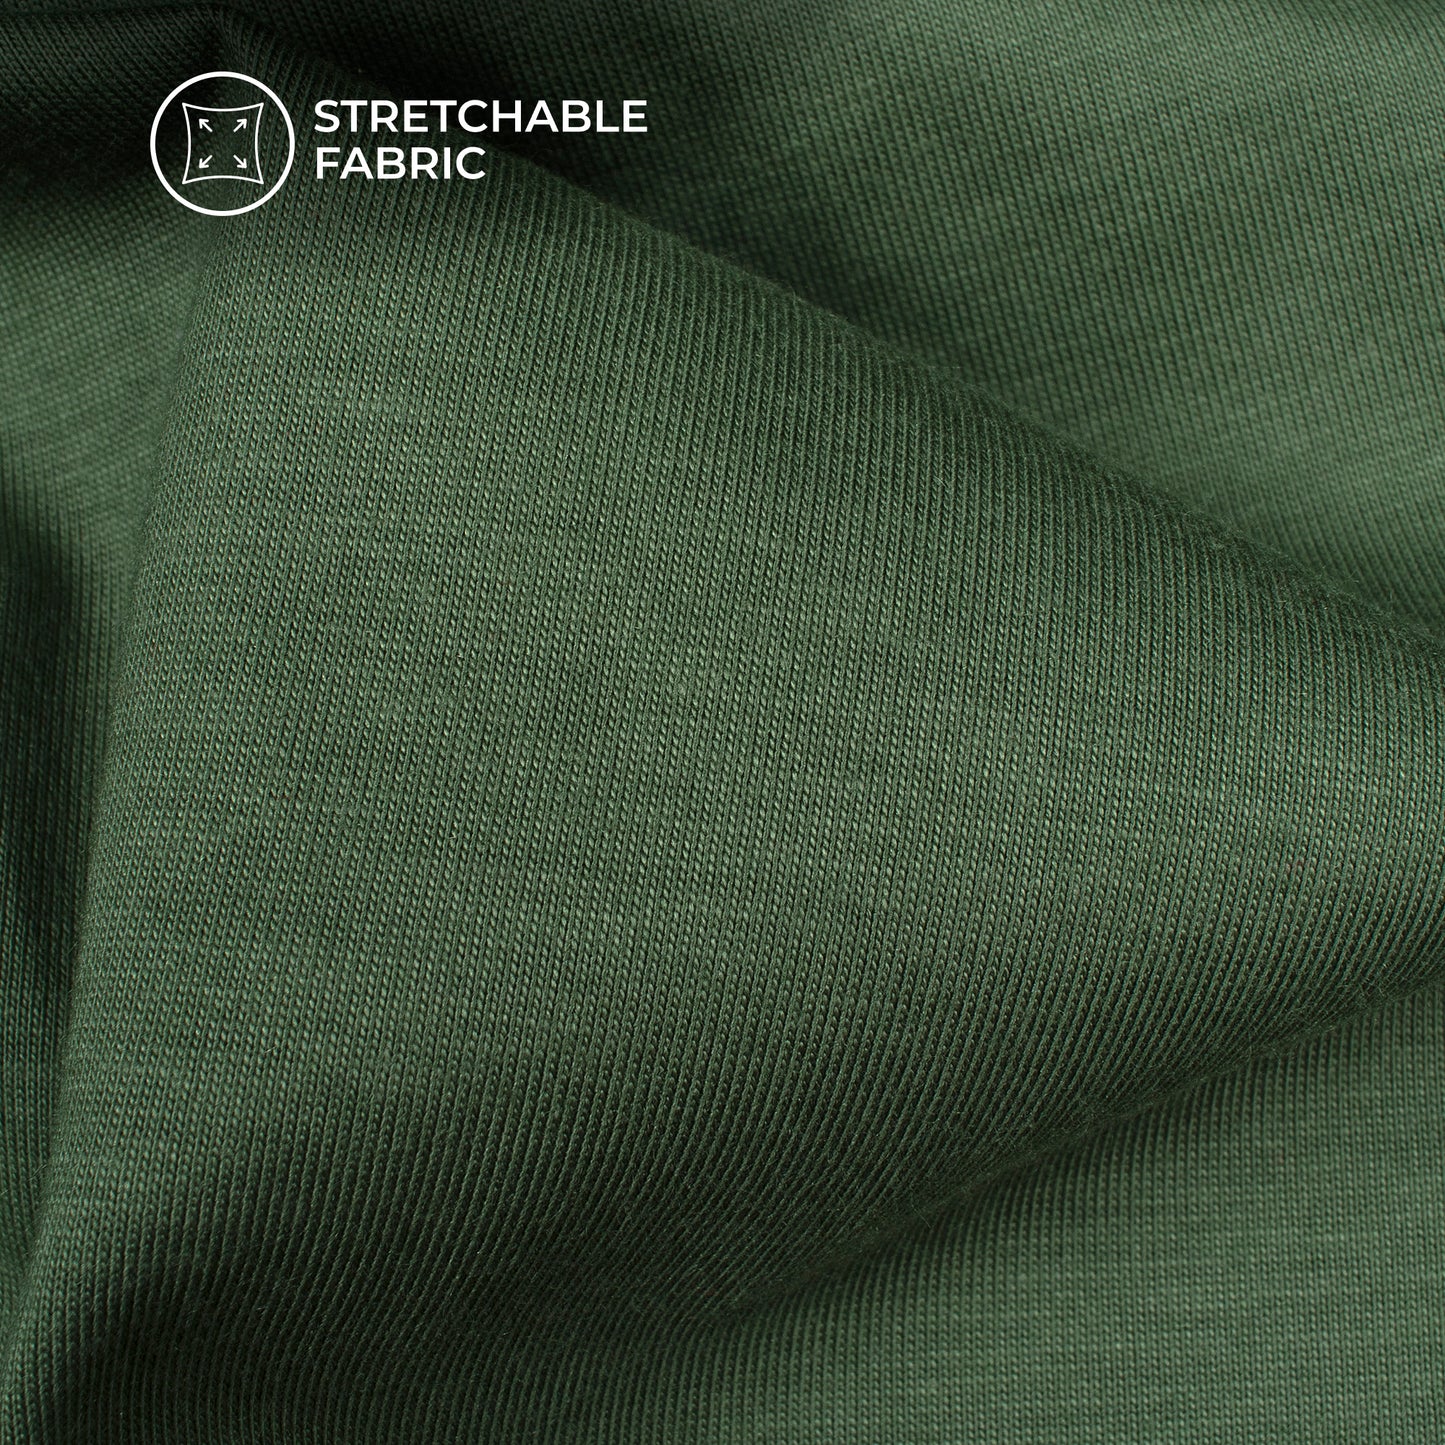 Fern Green Stratched Modal Cotton Lycra Fabric (Width 70 Inches)